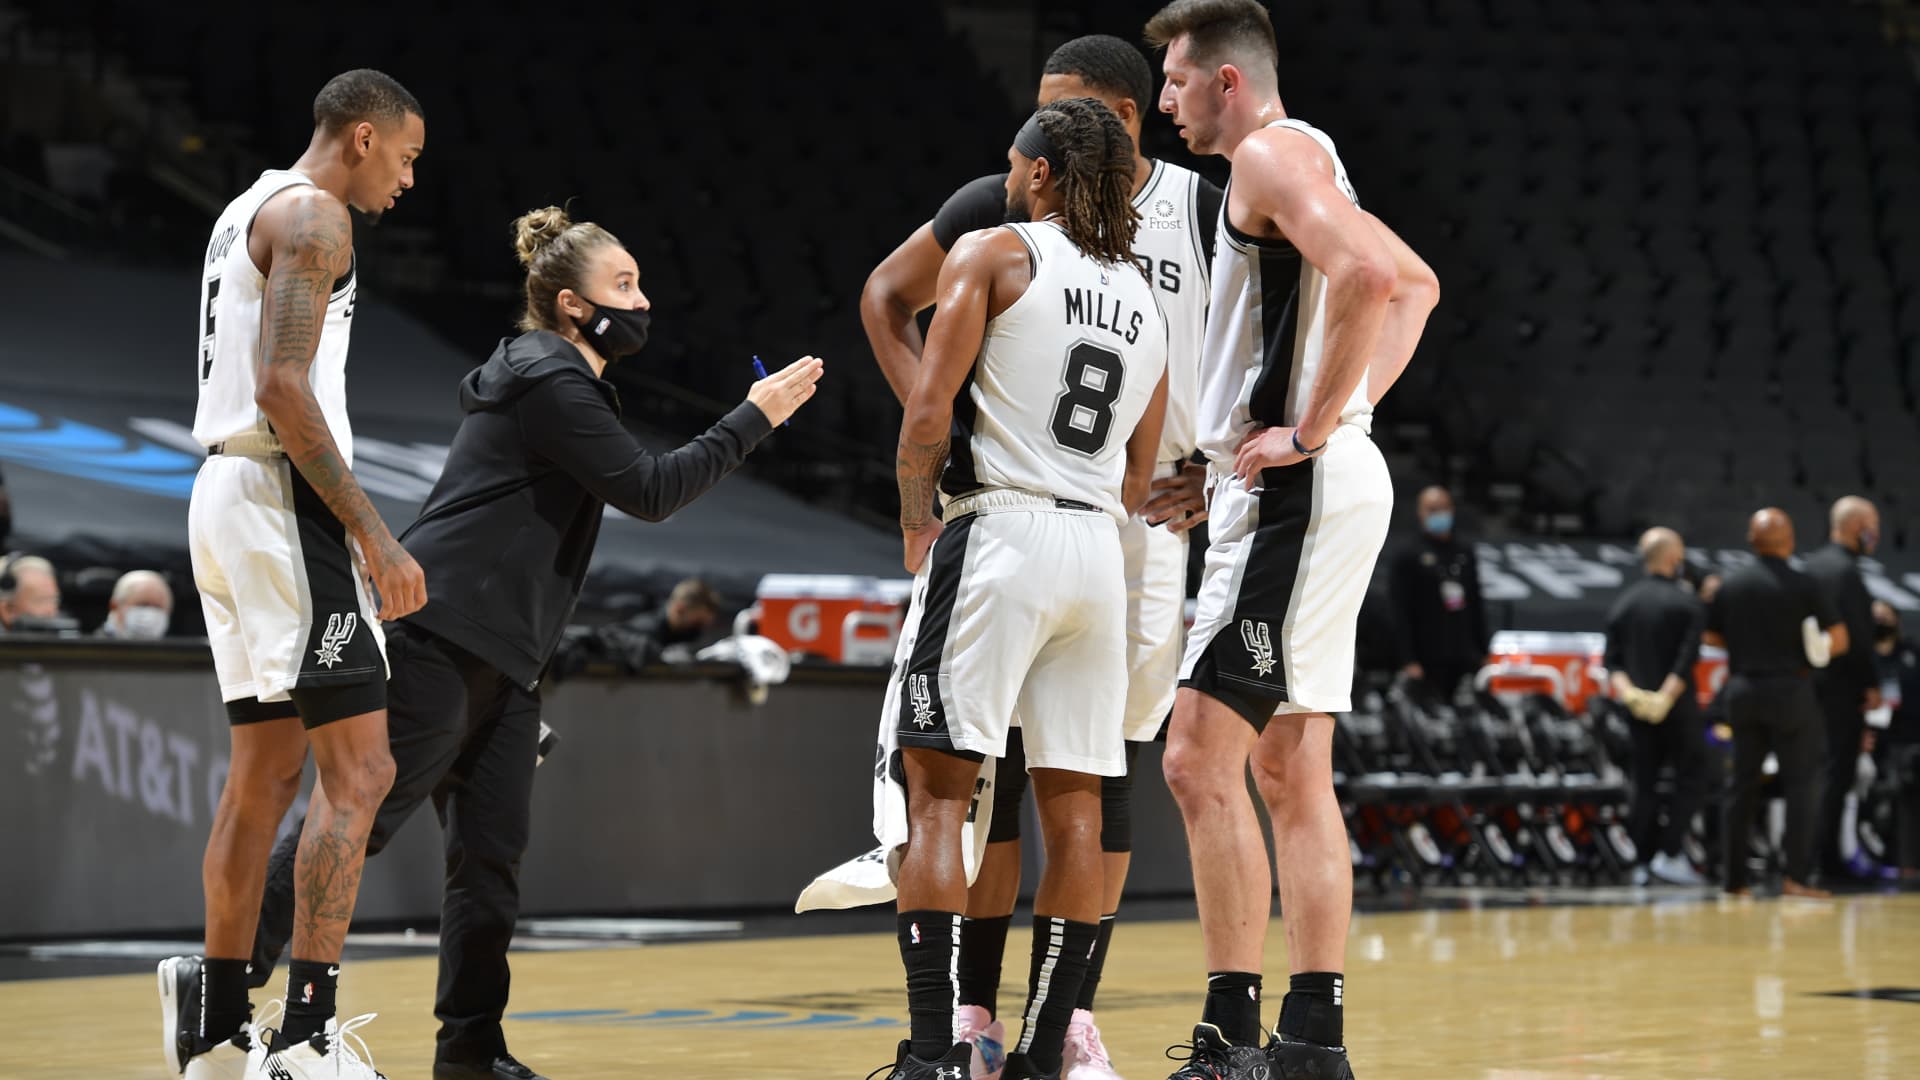 Assistant coach Becky Hammon of the San Antonio Spurs talks to her team during the game against the Los Angeles Lakers on December 30, 2020 at the AT&T Center in San Antonio, Texas.